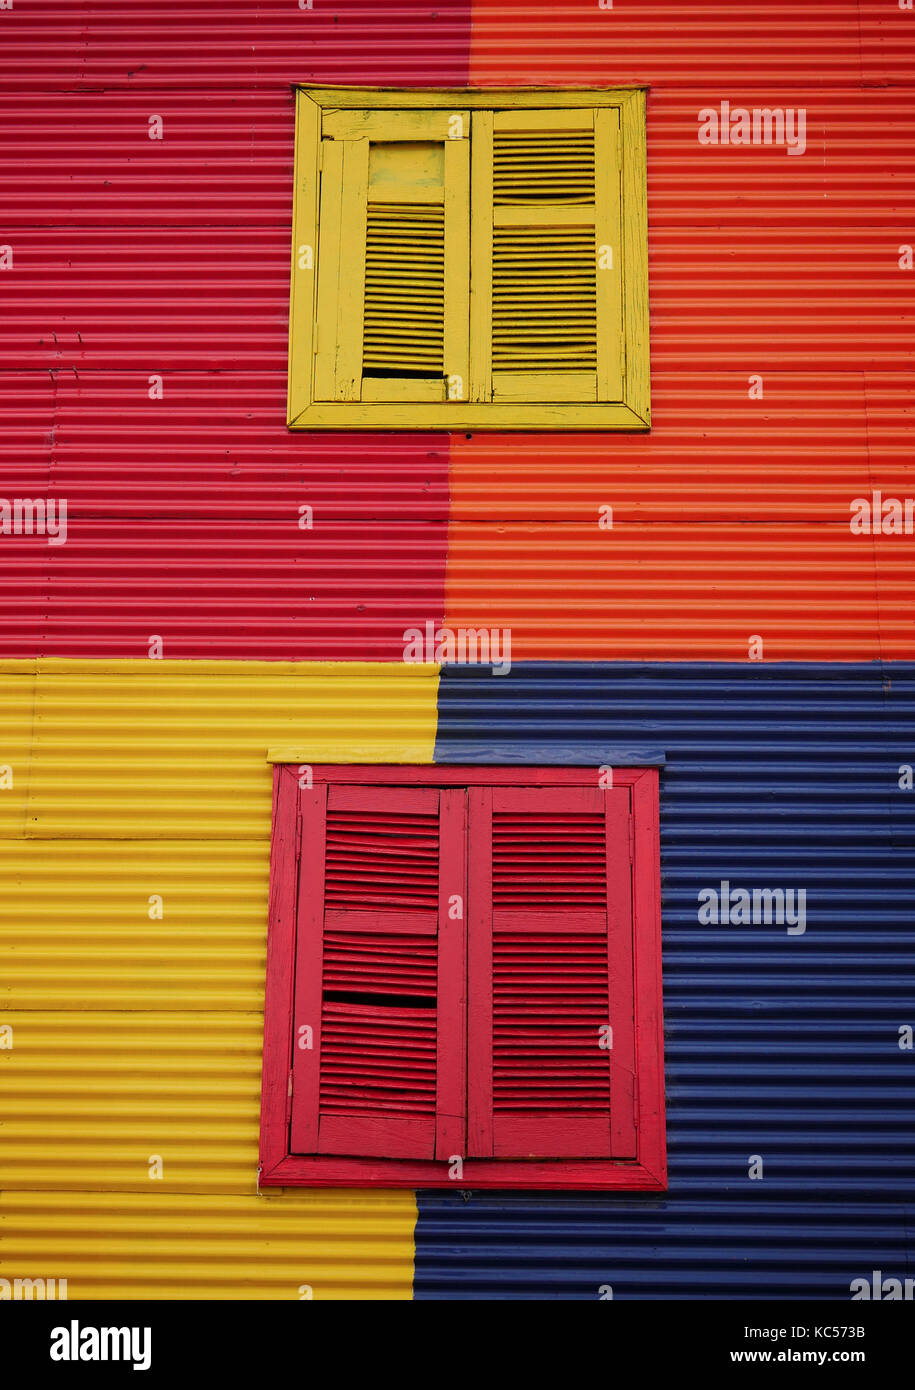 Painted shutters on house in Caminito, La Boca, Buenos Aires, Argentina Stock Photo